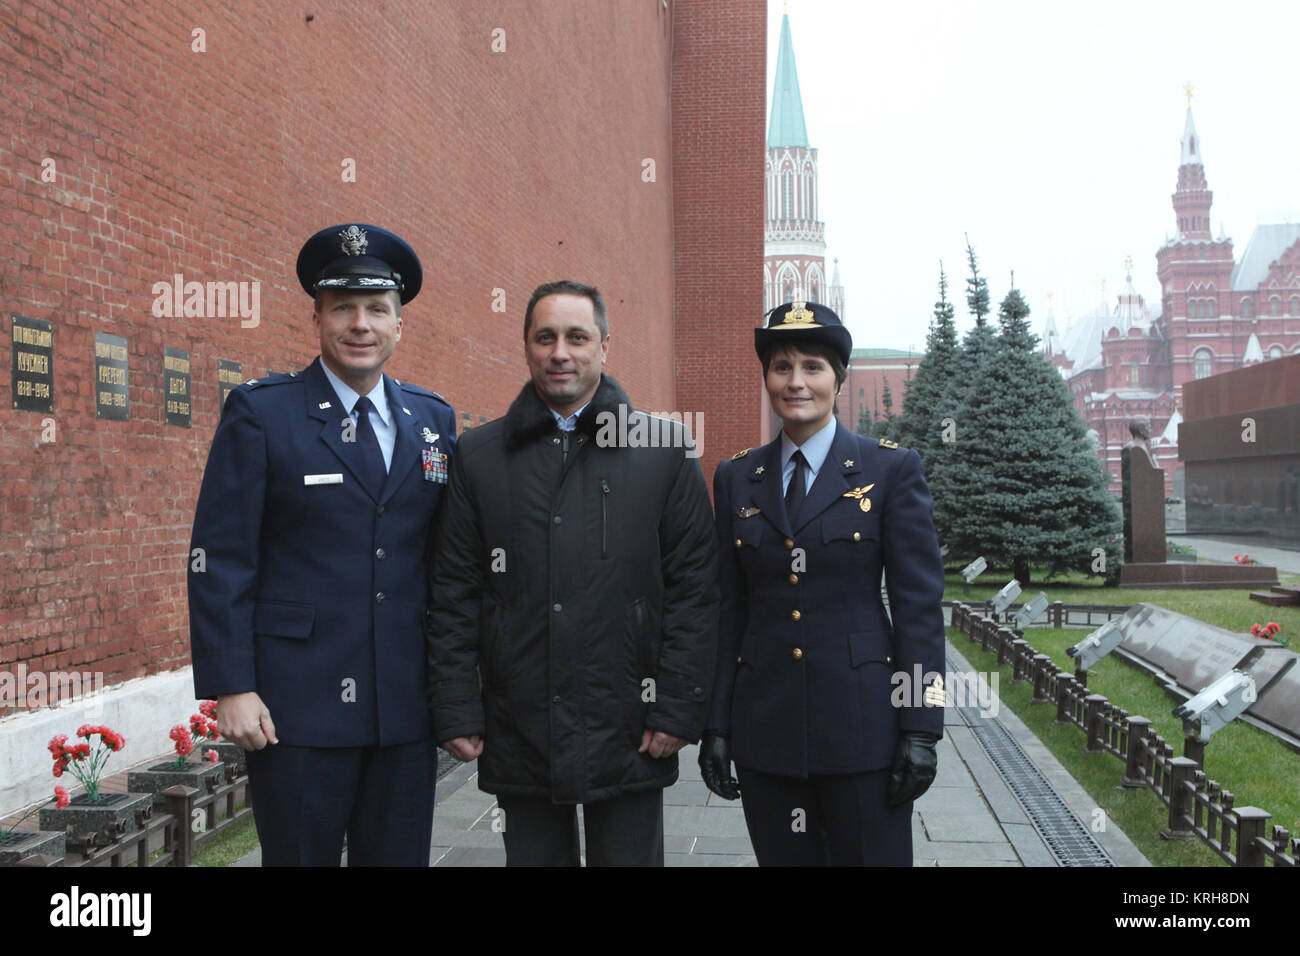 4152:  At the Kremlin Wall in Red Square in Moscow, Expedition 42/43 crewmembers Terry Virts of NASA (left), Anton Shkaplerov of the Russian Federal Space Agency (Roscosmos, center) and Samantha Cristoforetti of the European Space Agency (right) pose for pictures Nov. 6 after laying flowers at the site where Russian space icons are interred. The trio will launch Nov. 24, Kazakh time from the Baikonur Cosmodrome in Kazakhstan on their Soyuz TMA-15M spacecraft for a 5 ½ month mission on the International Space Station.  NASA/Stephanie Stoll Soyuz TMA-15M crew at the Kremlin Wall Stock Photo